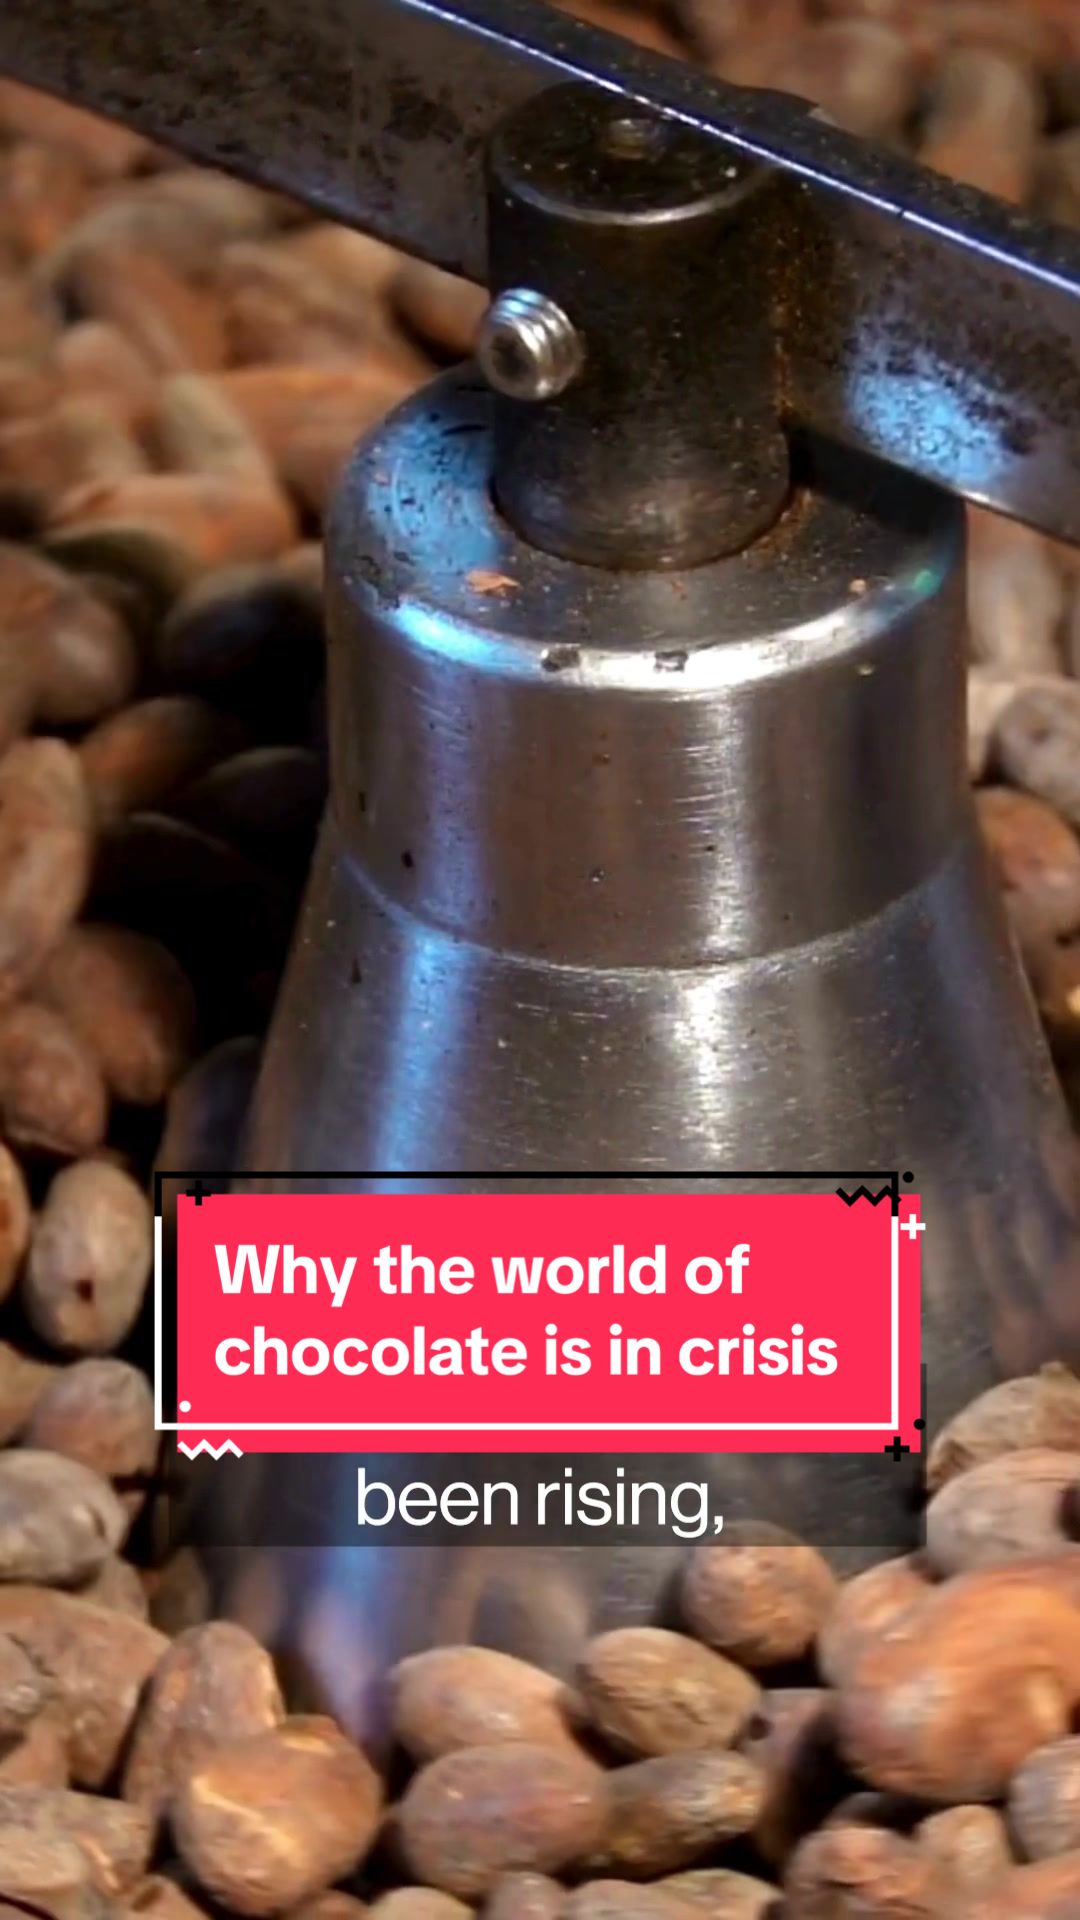 The world of #chocolate is facing such immense #cocoa shortages that the wild trading lured an unlikely player: Pierre Andurand, a hedge-fund manager best known for his bets on oil. Ilena Peng explains why the world of chocolate is in crisis. #food #supplychain #business